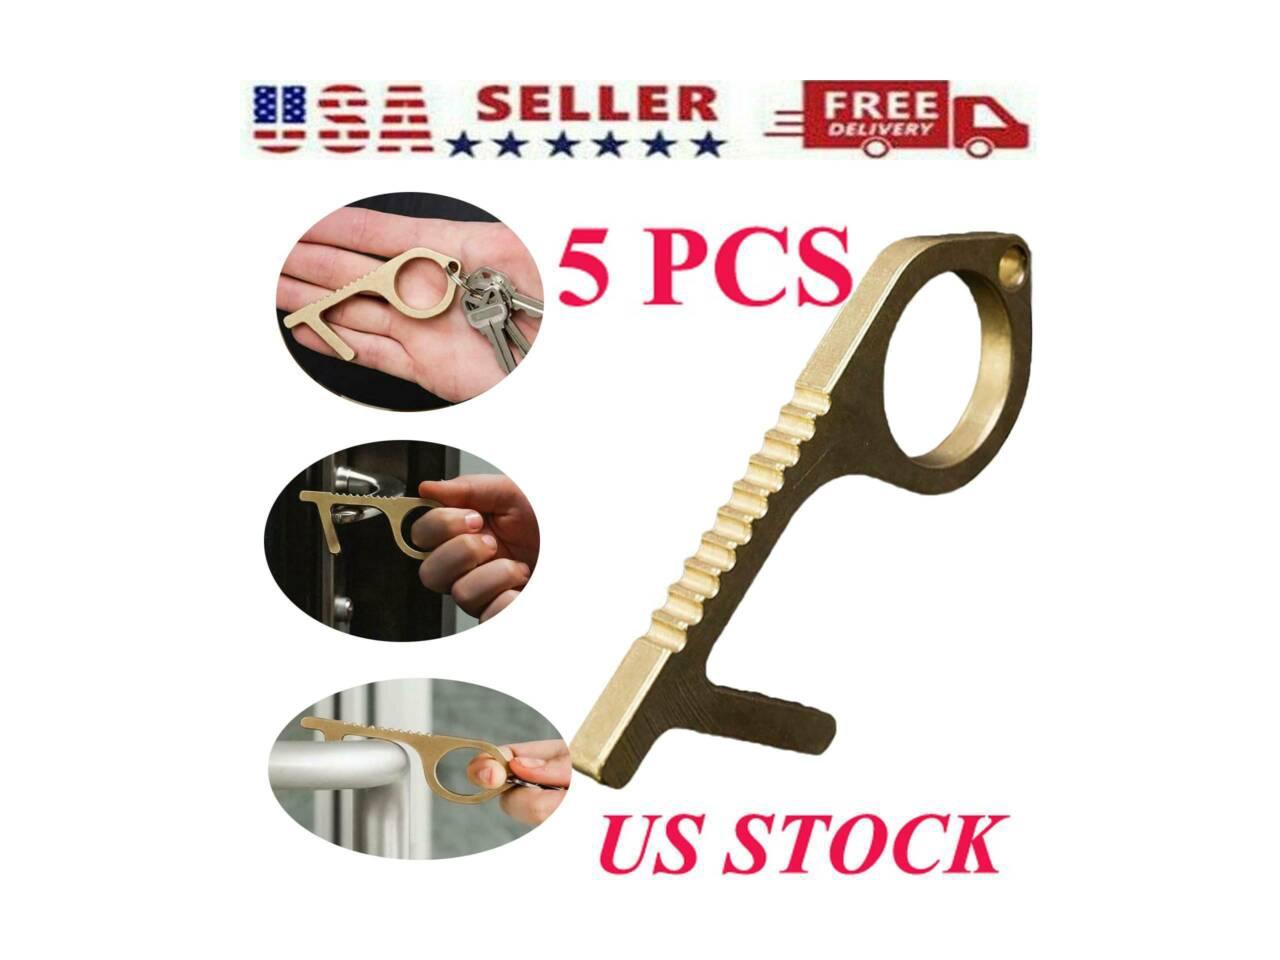 Portable Press Elevator Tool for Health Protection Personalized Keychain Keep Hands Clean Non-contact Press Elevator Hand Stick Tacey Contactless Brass Door Opener Closer